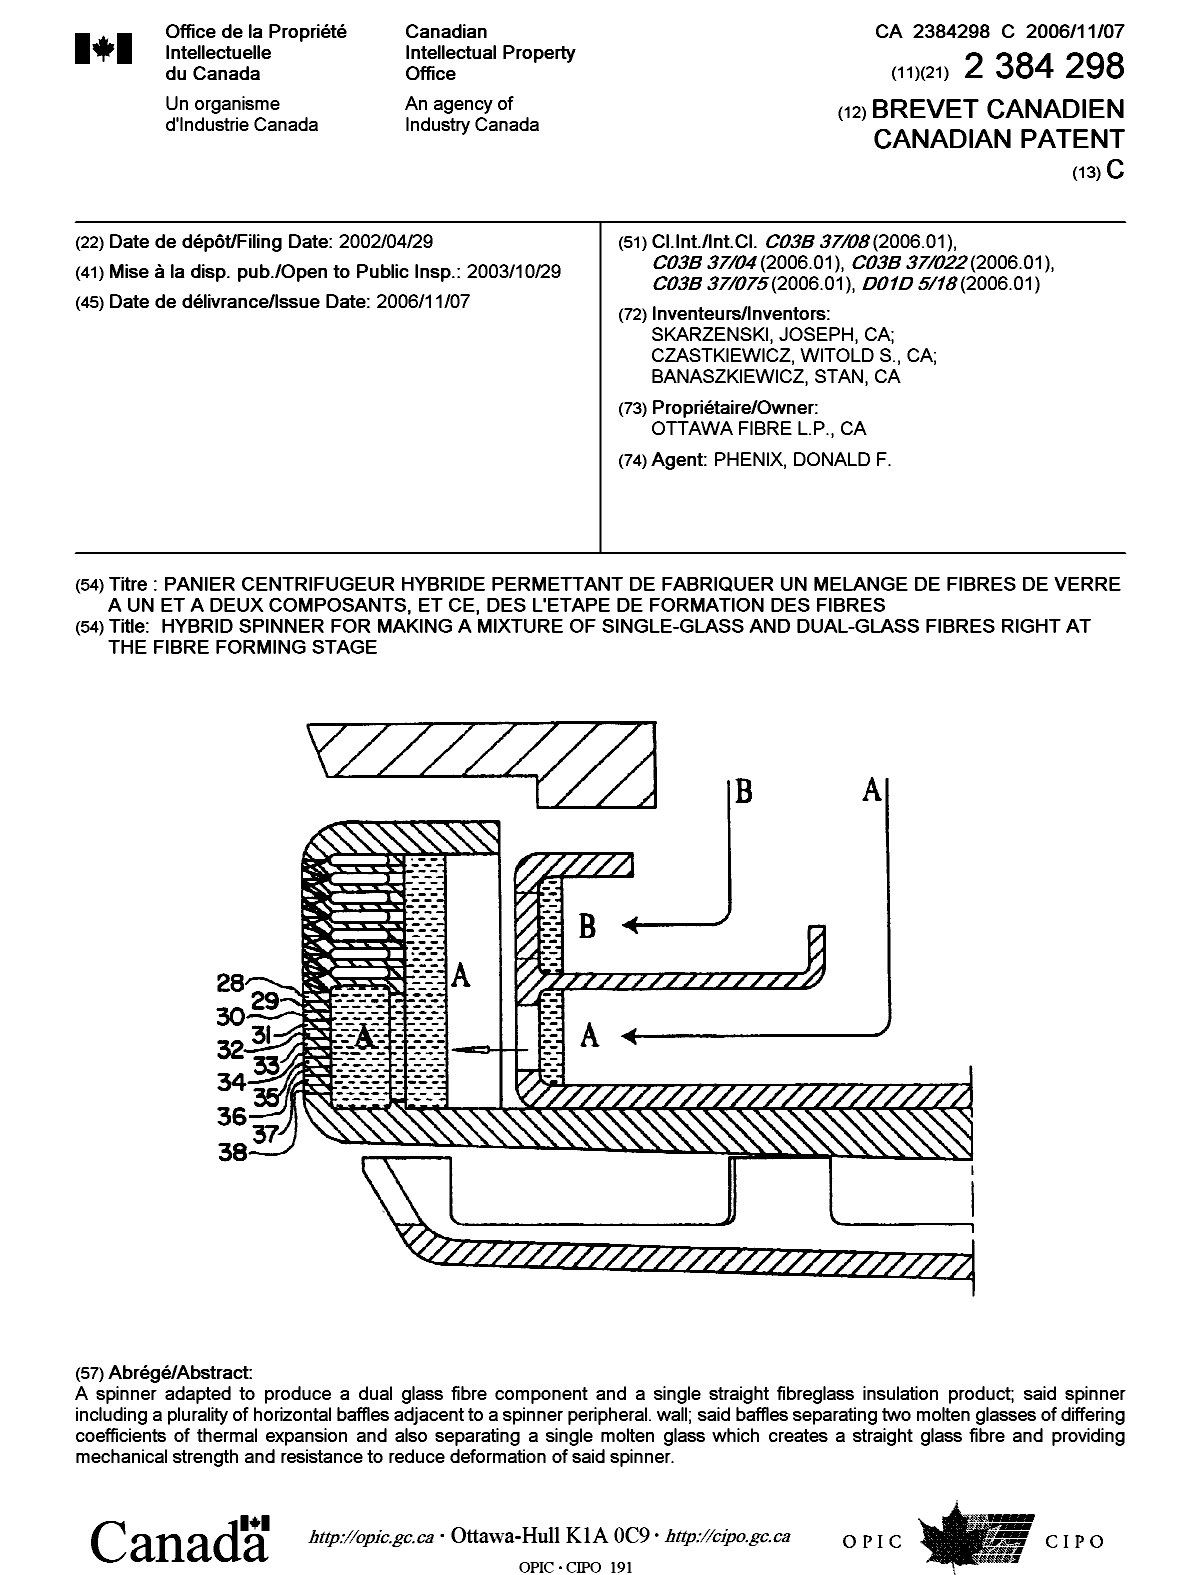 Canadian Patent Document 2384298. Cover Page 20061011. Image 1 of 1